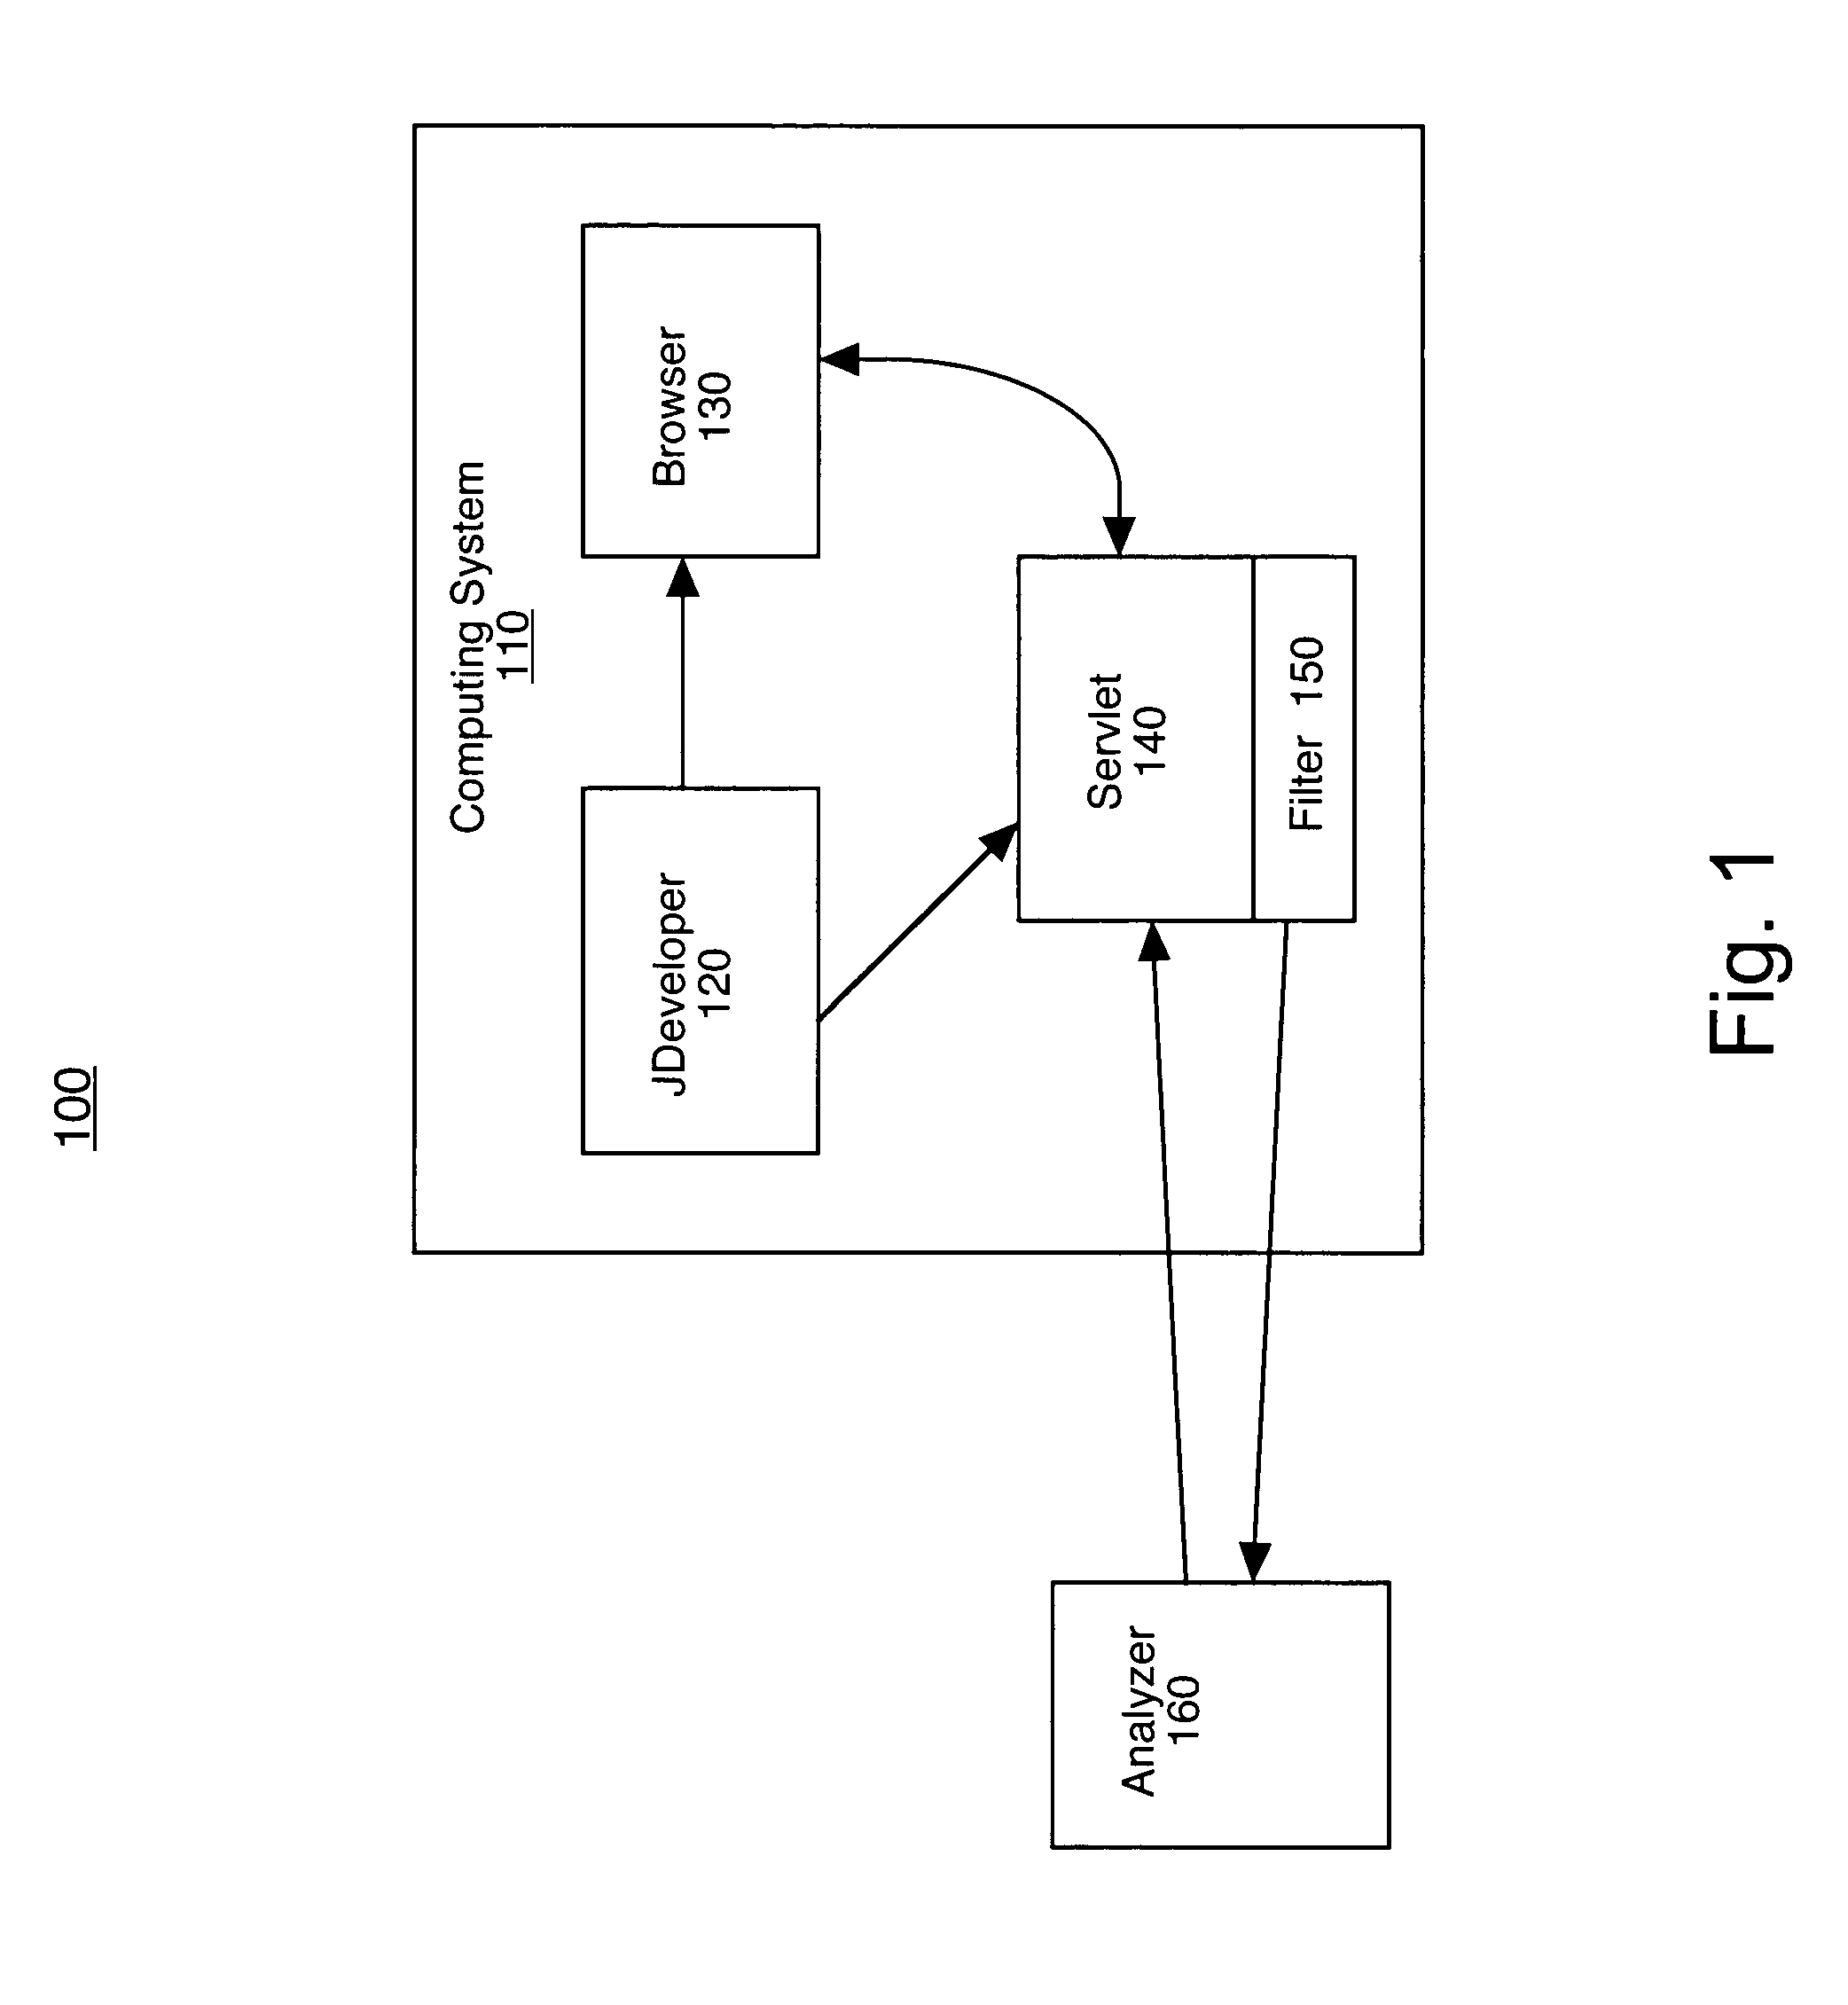 System and method for analyzing content on a web page using an embedded filter